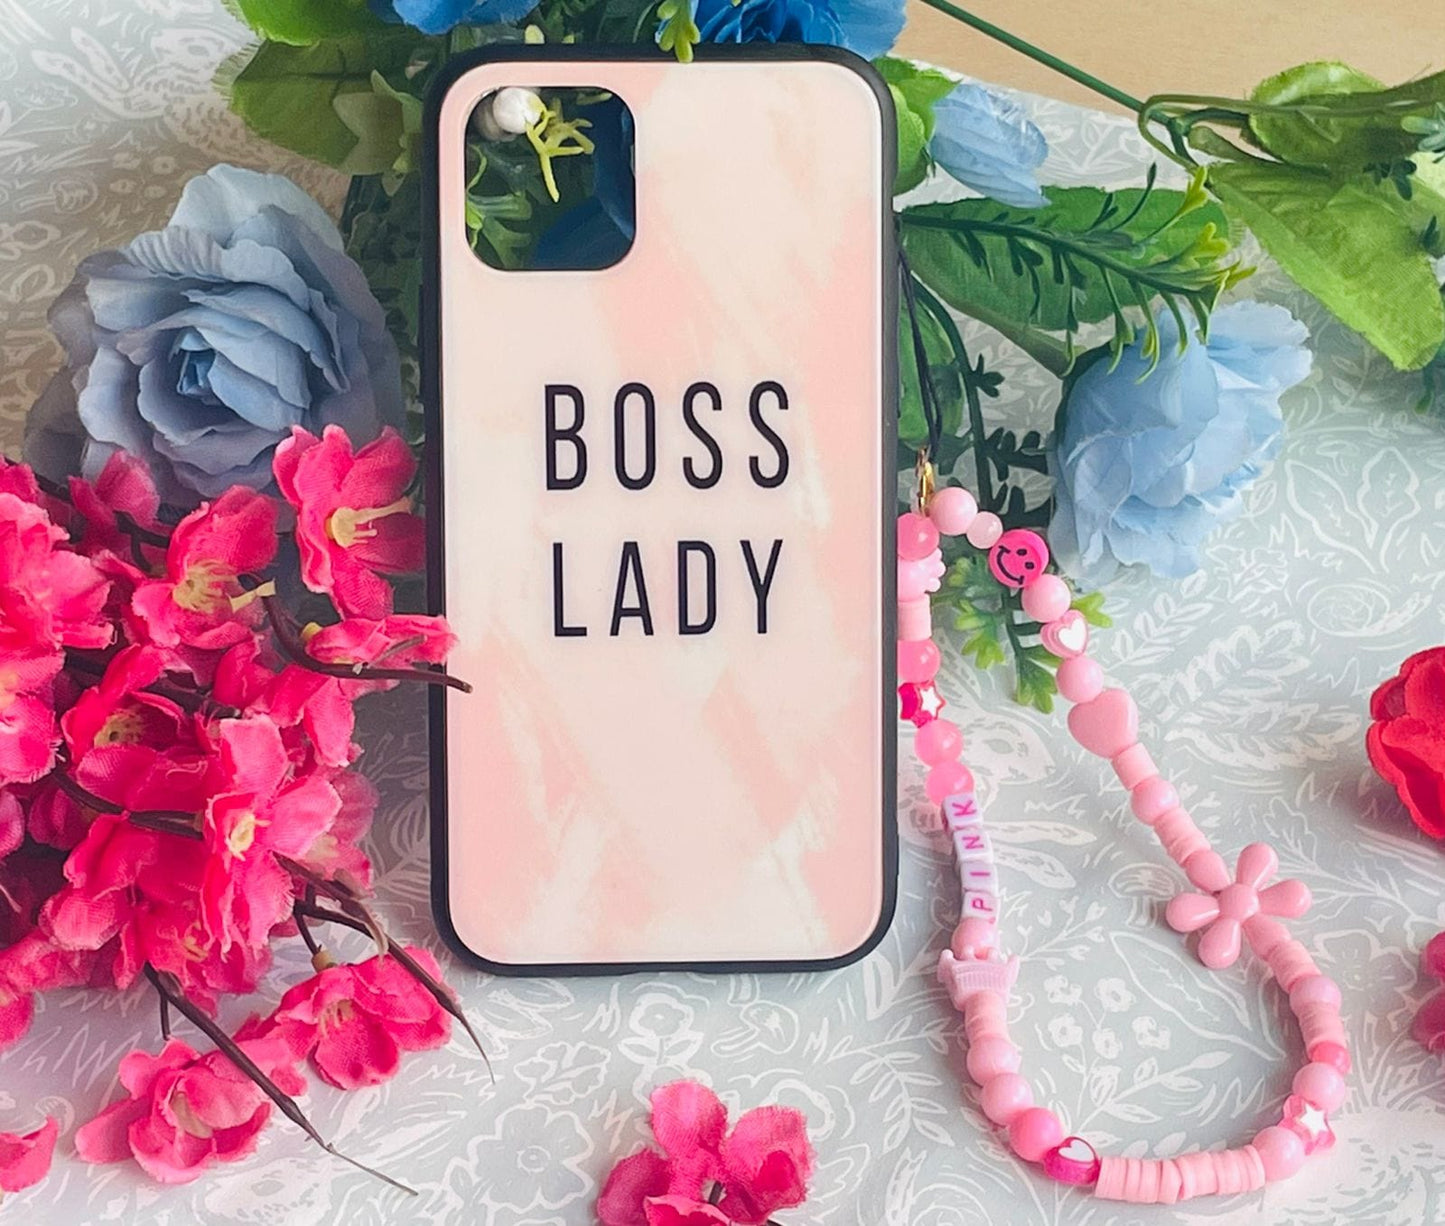 Boss Lady phone case with charm